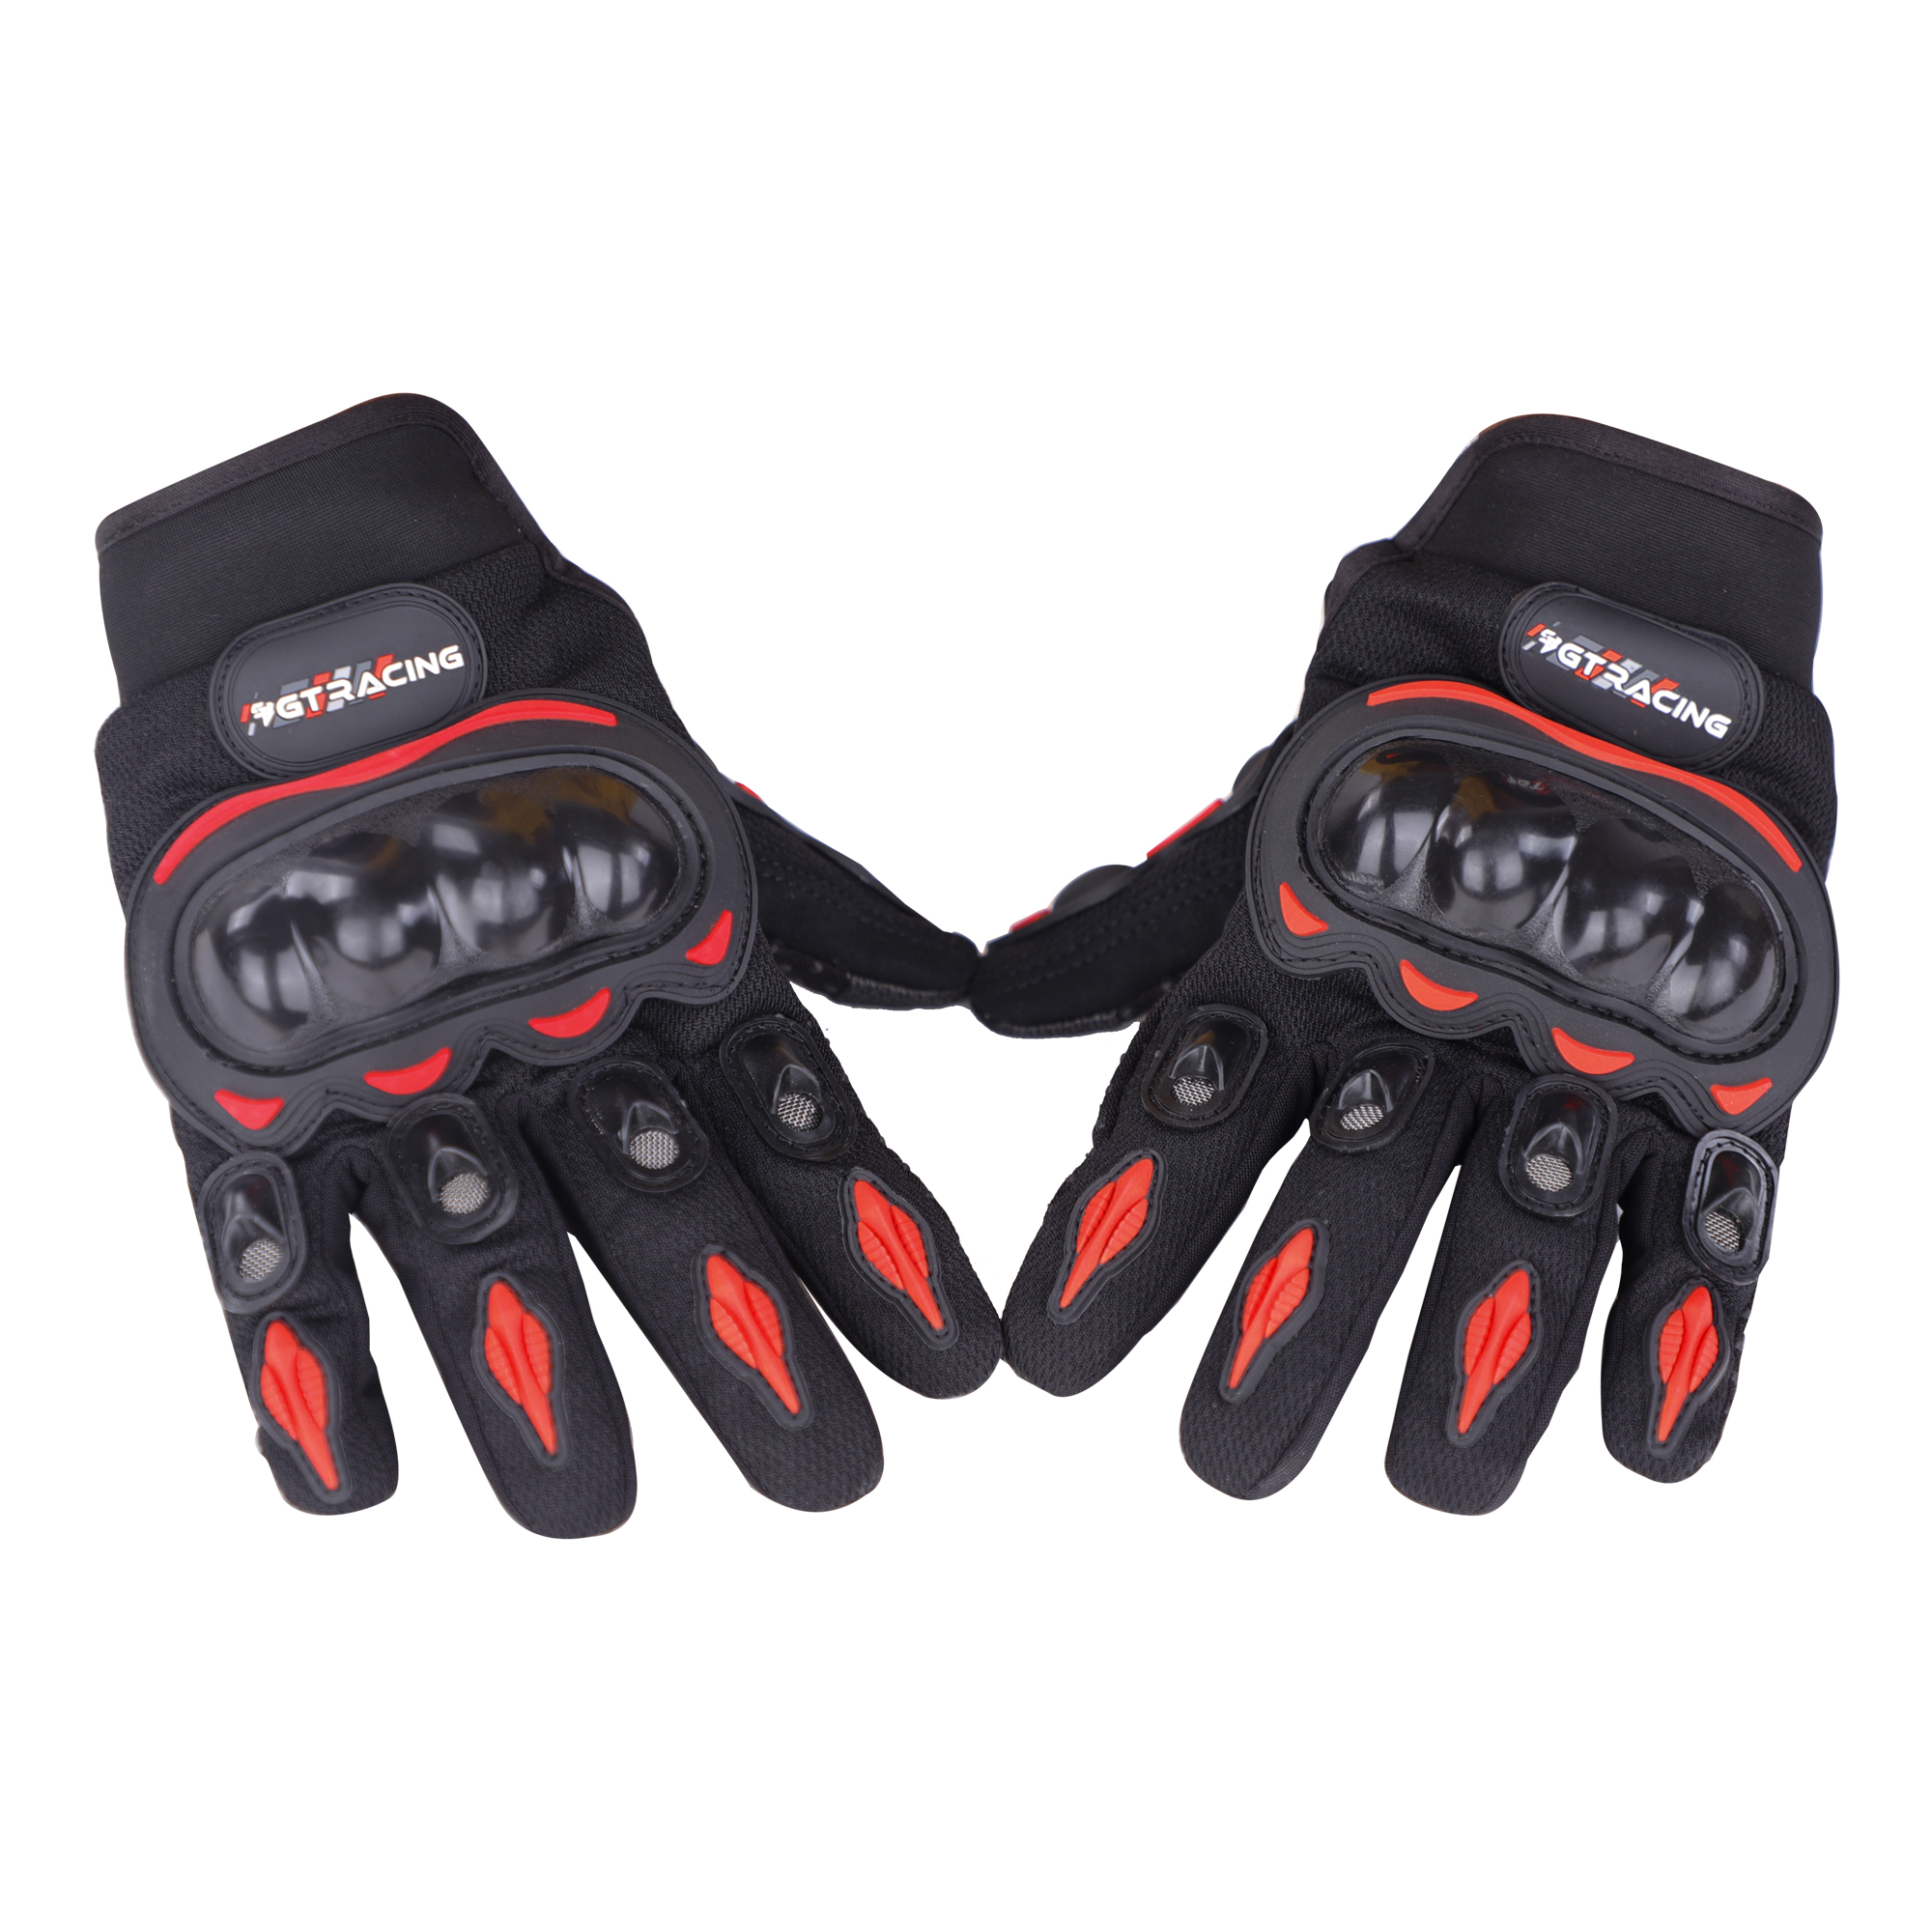 Steelbird GT-01 Full Finger Bike Riding Gloves With Touch Screen Sensitivity At Thumb And Index Finger, Protective Off-Road Motorbike Racing (Red)